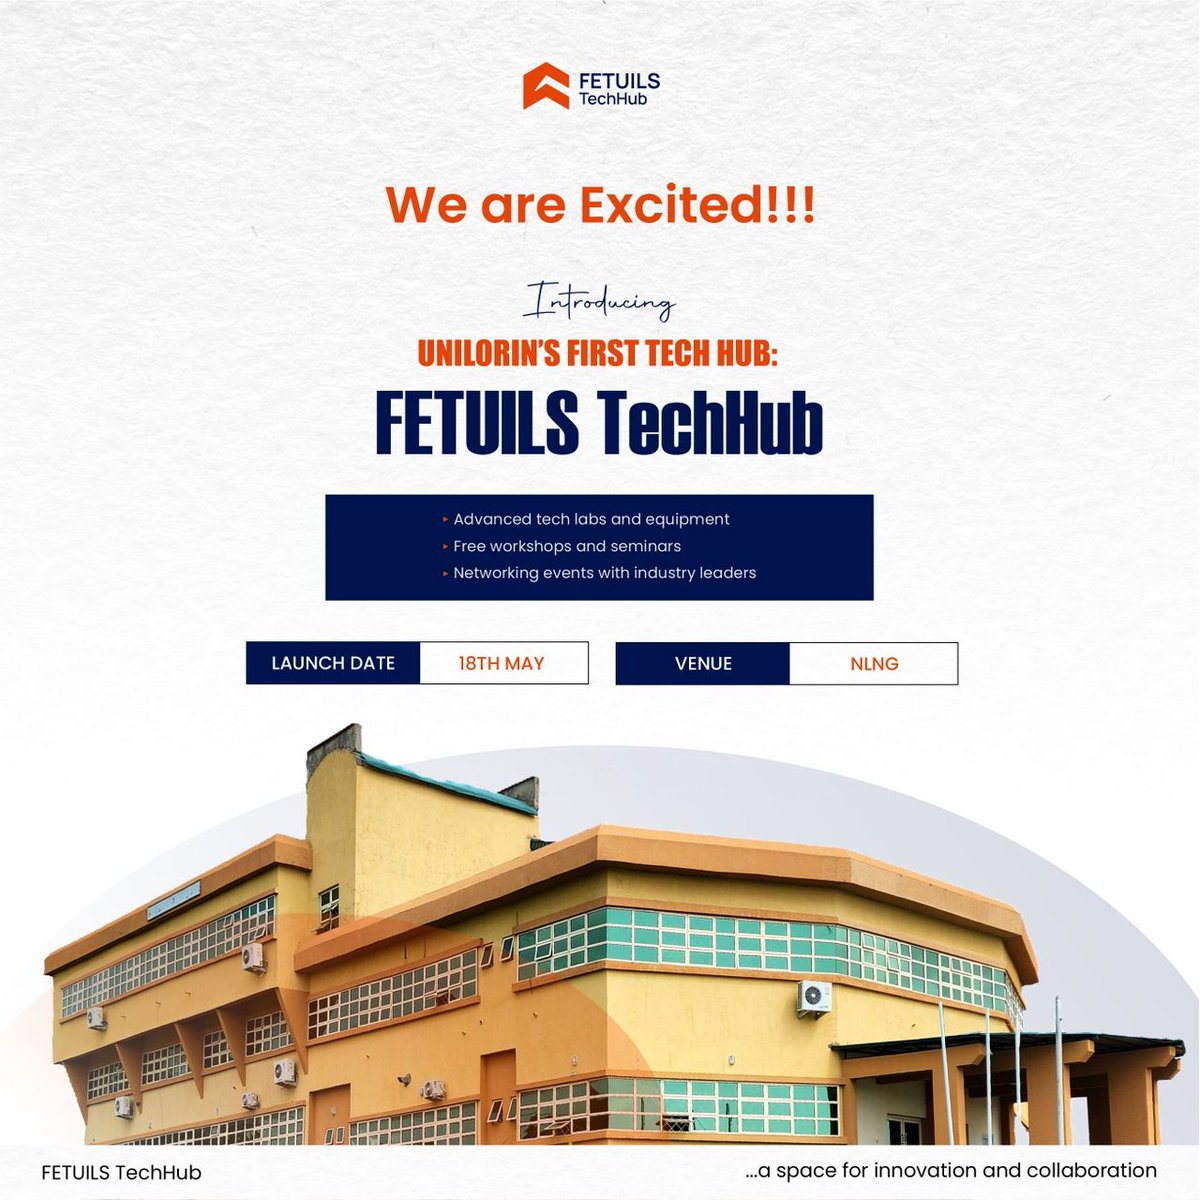 Ready to Innovate? Unveil Your Potential at FETUILS TechHub!

The University of Ilorin is excited to announce the launch of its first-ever tech hub, FETUILS TechHub!